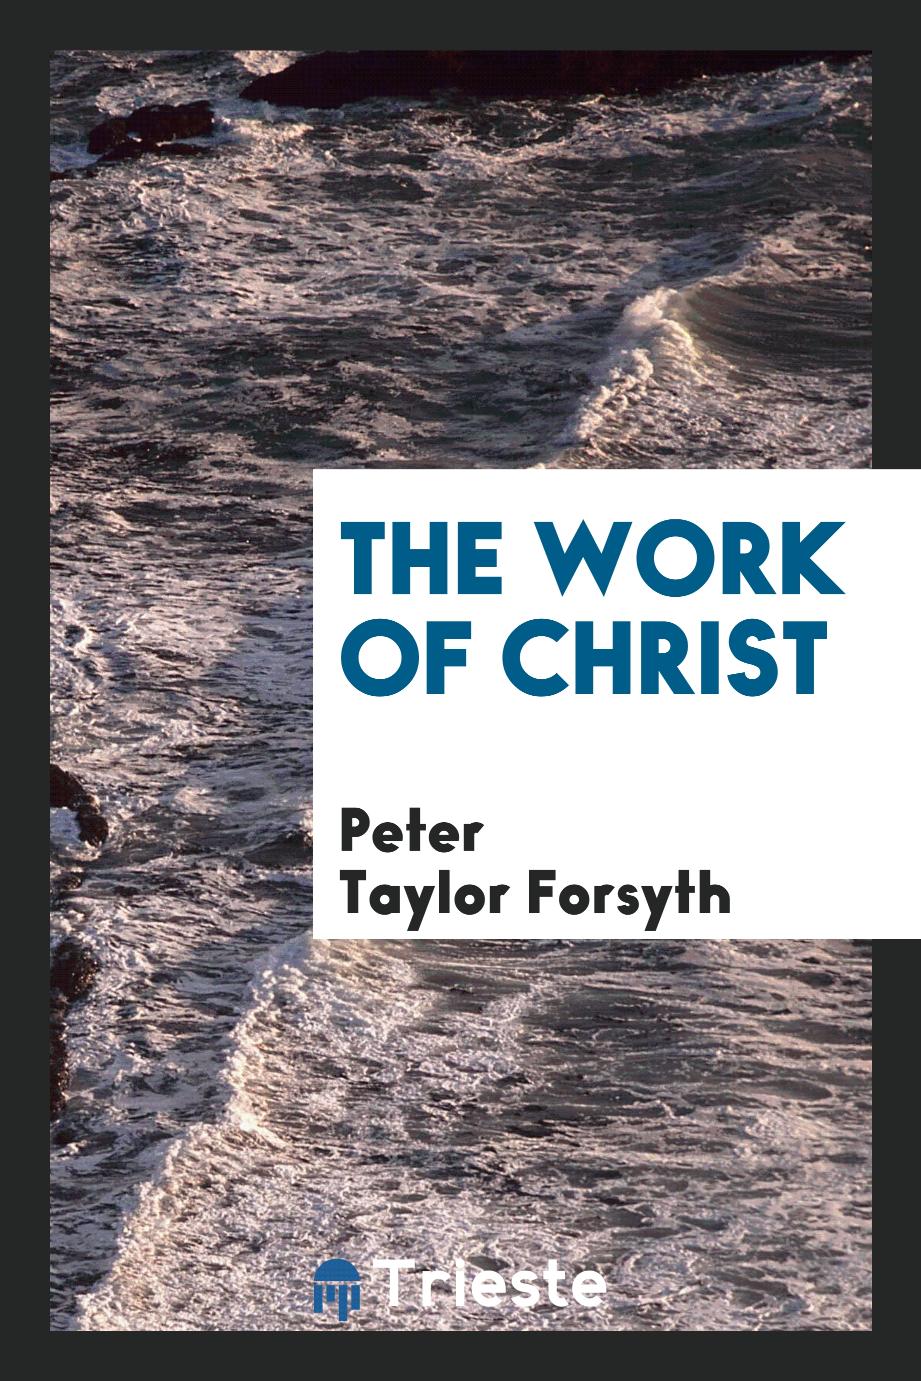 The work of Christ